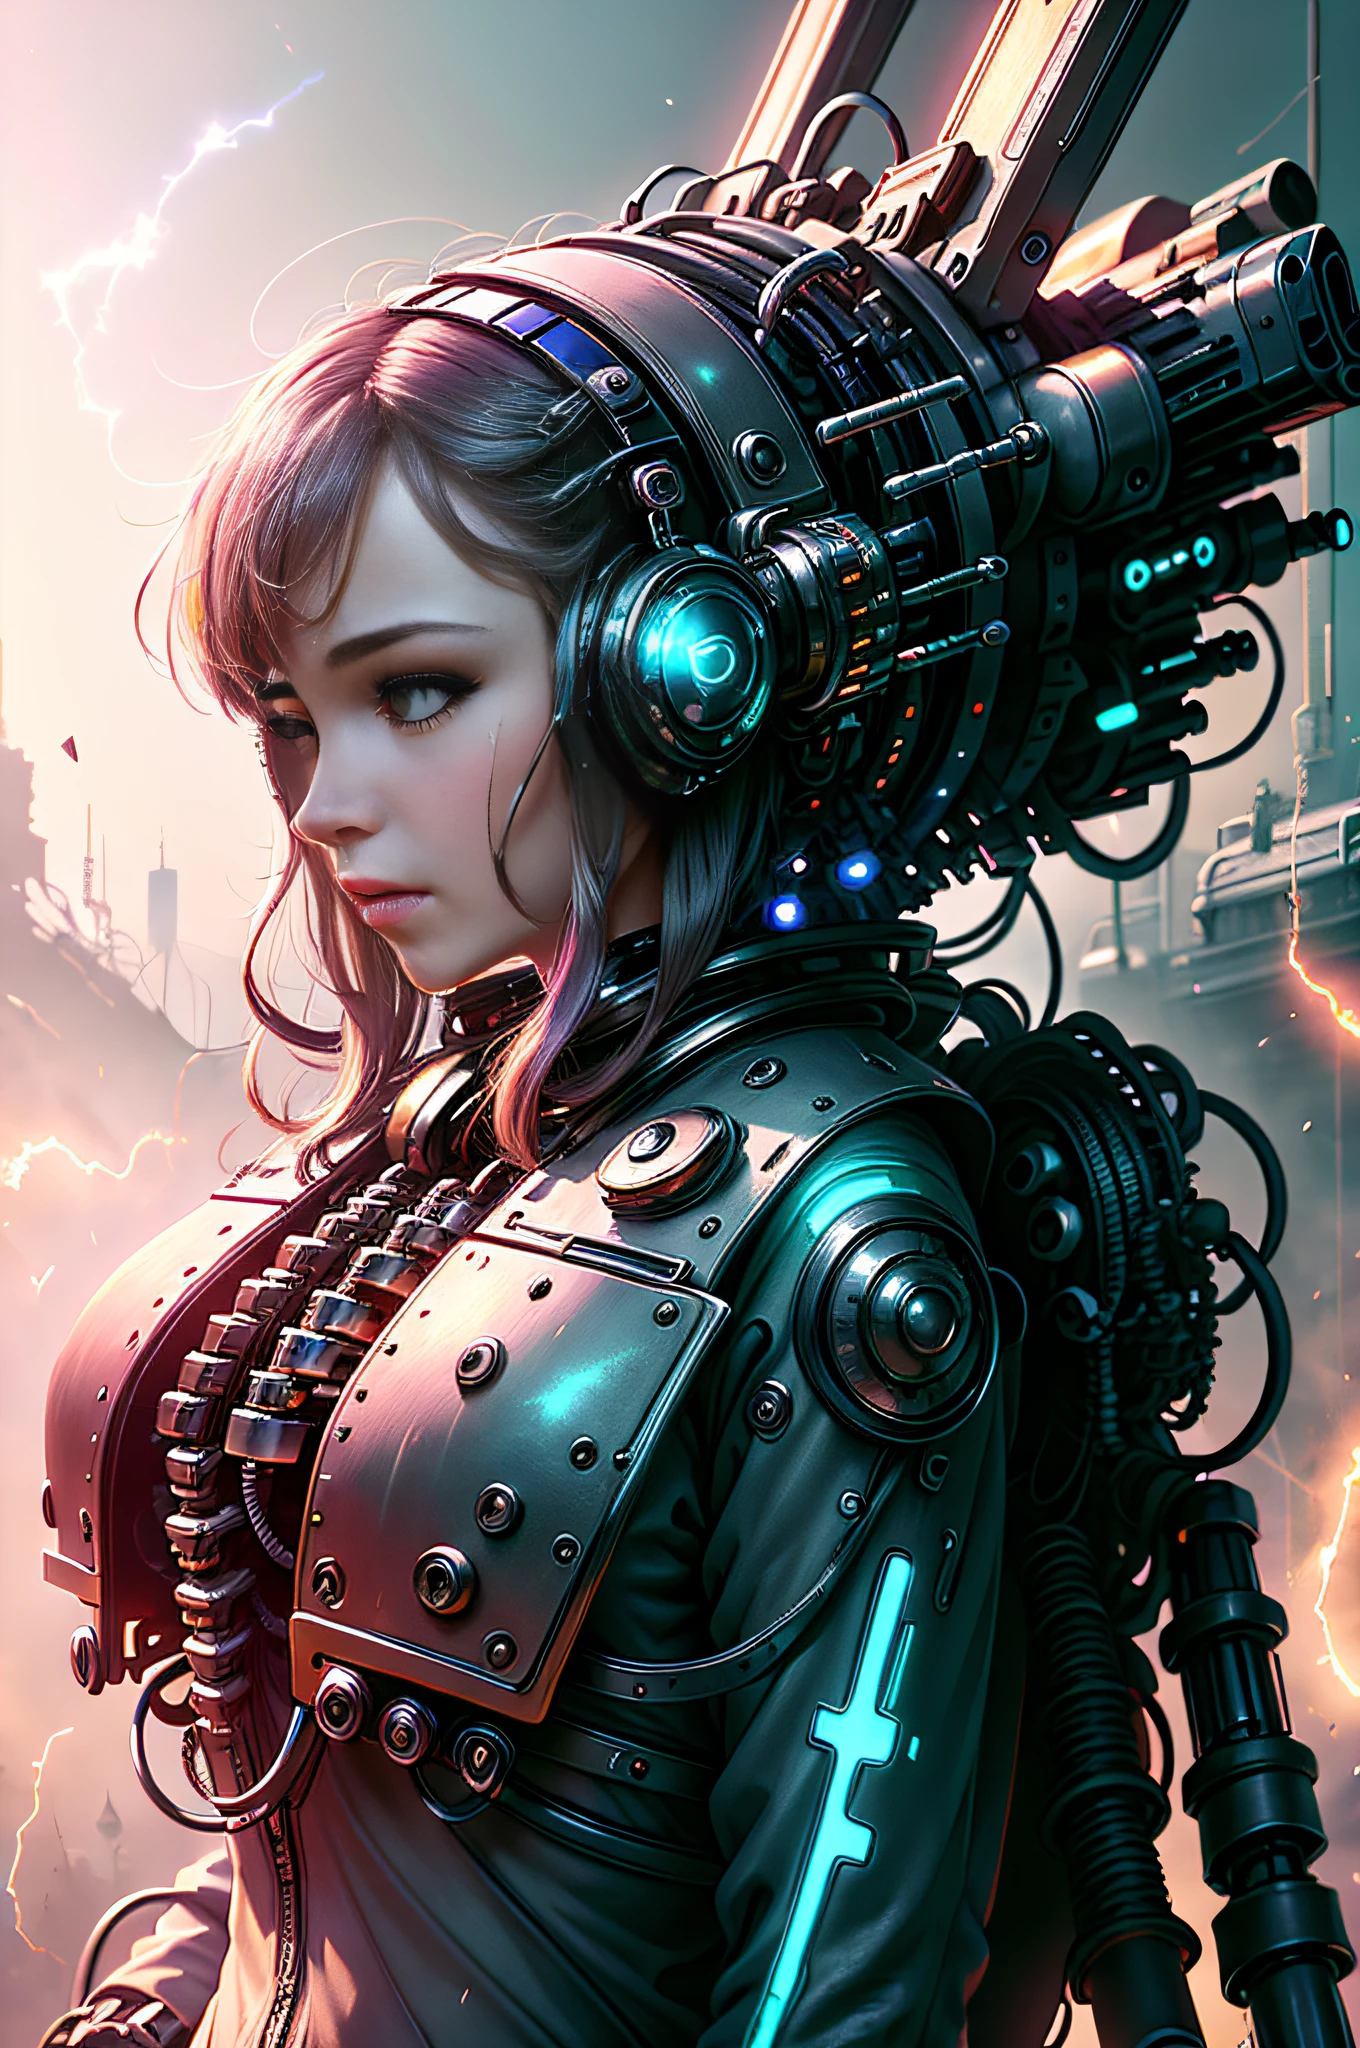 (Masterpiece, Top Quality, Best Quality, Official Art, Beauty and Aesthetic: 1.2), (1 Girl), Mecha, Future, Technology, Light, Cyberpunk City, Entanglement, Upper Body, Extremely Detailed, (Fractal Art: 1.3), colorful and most detailed